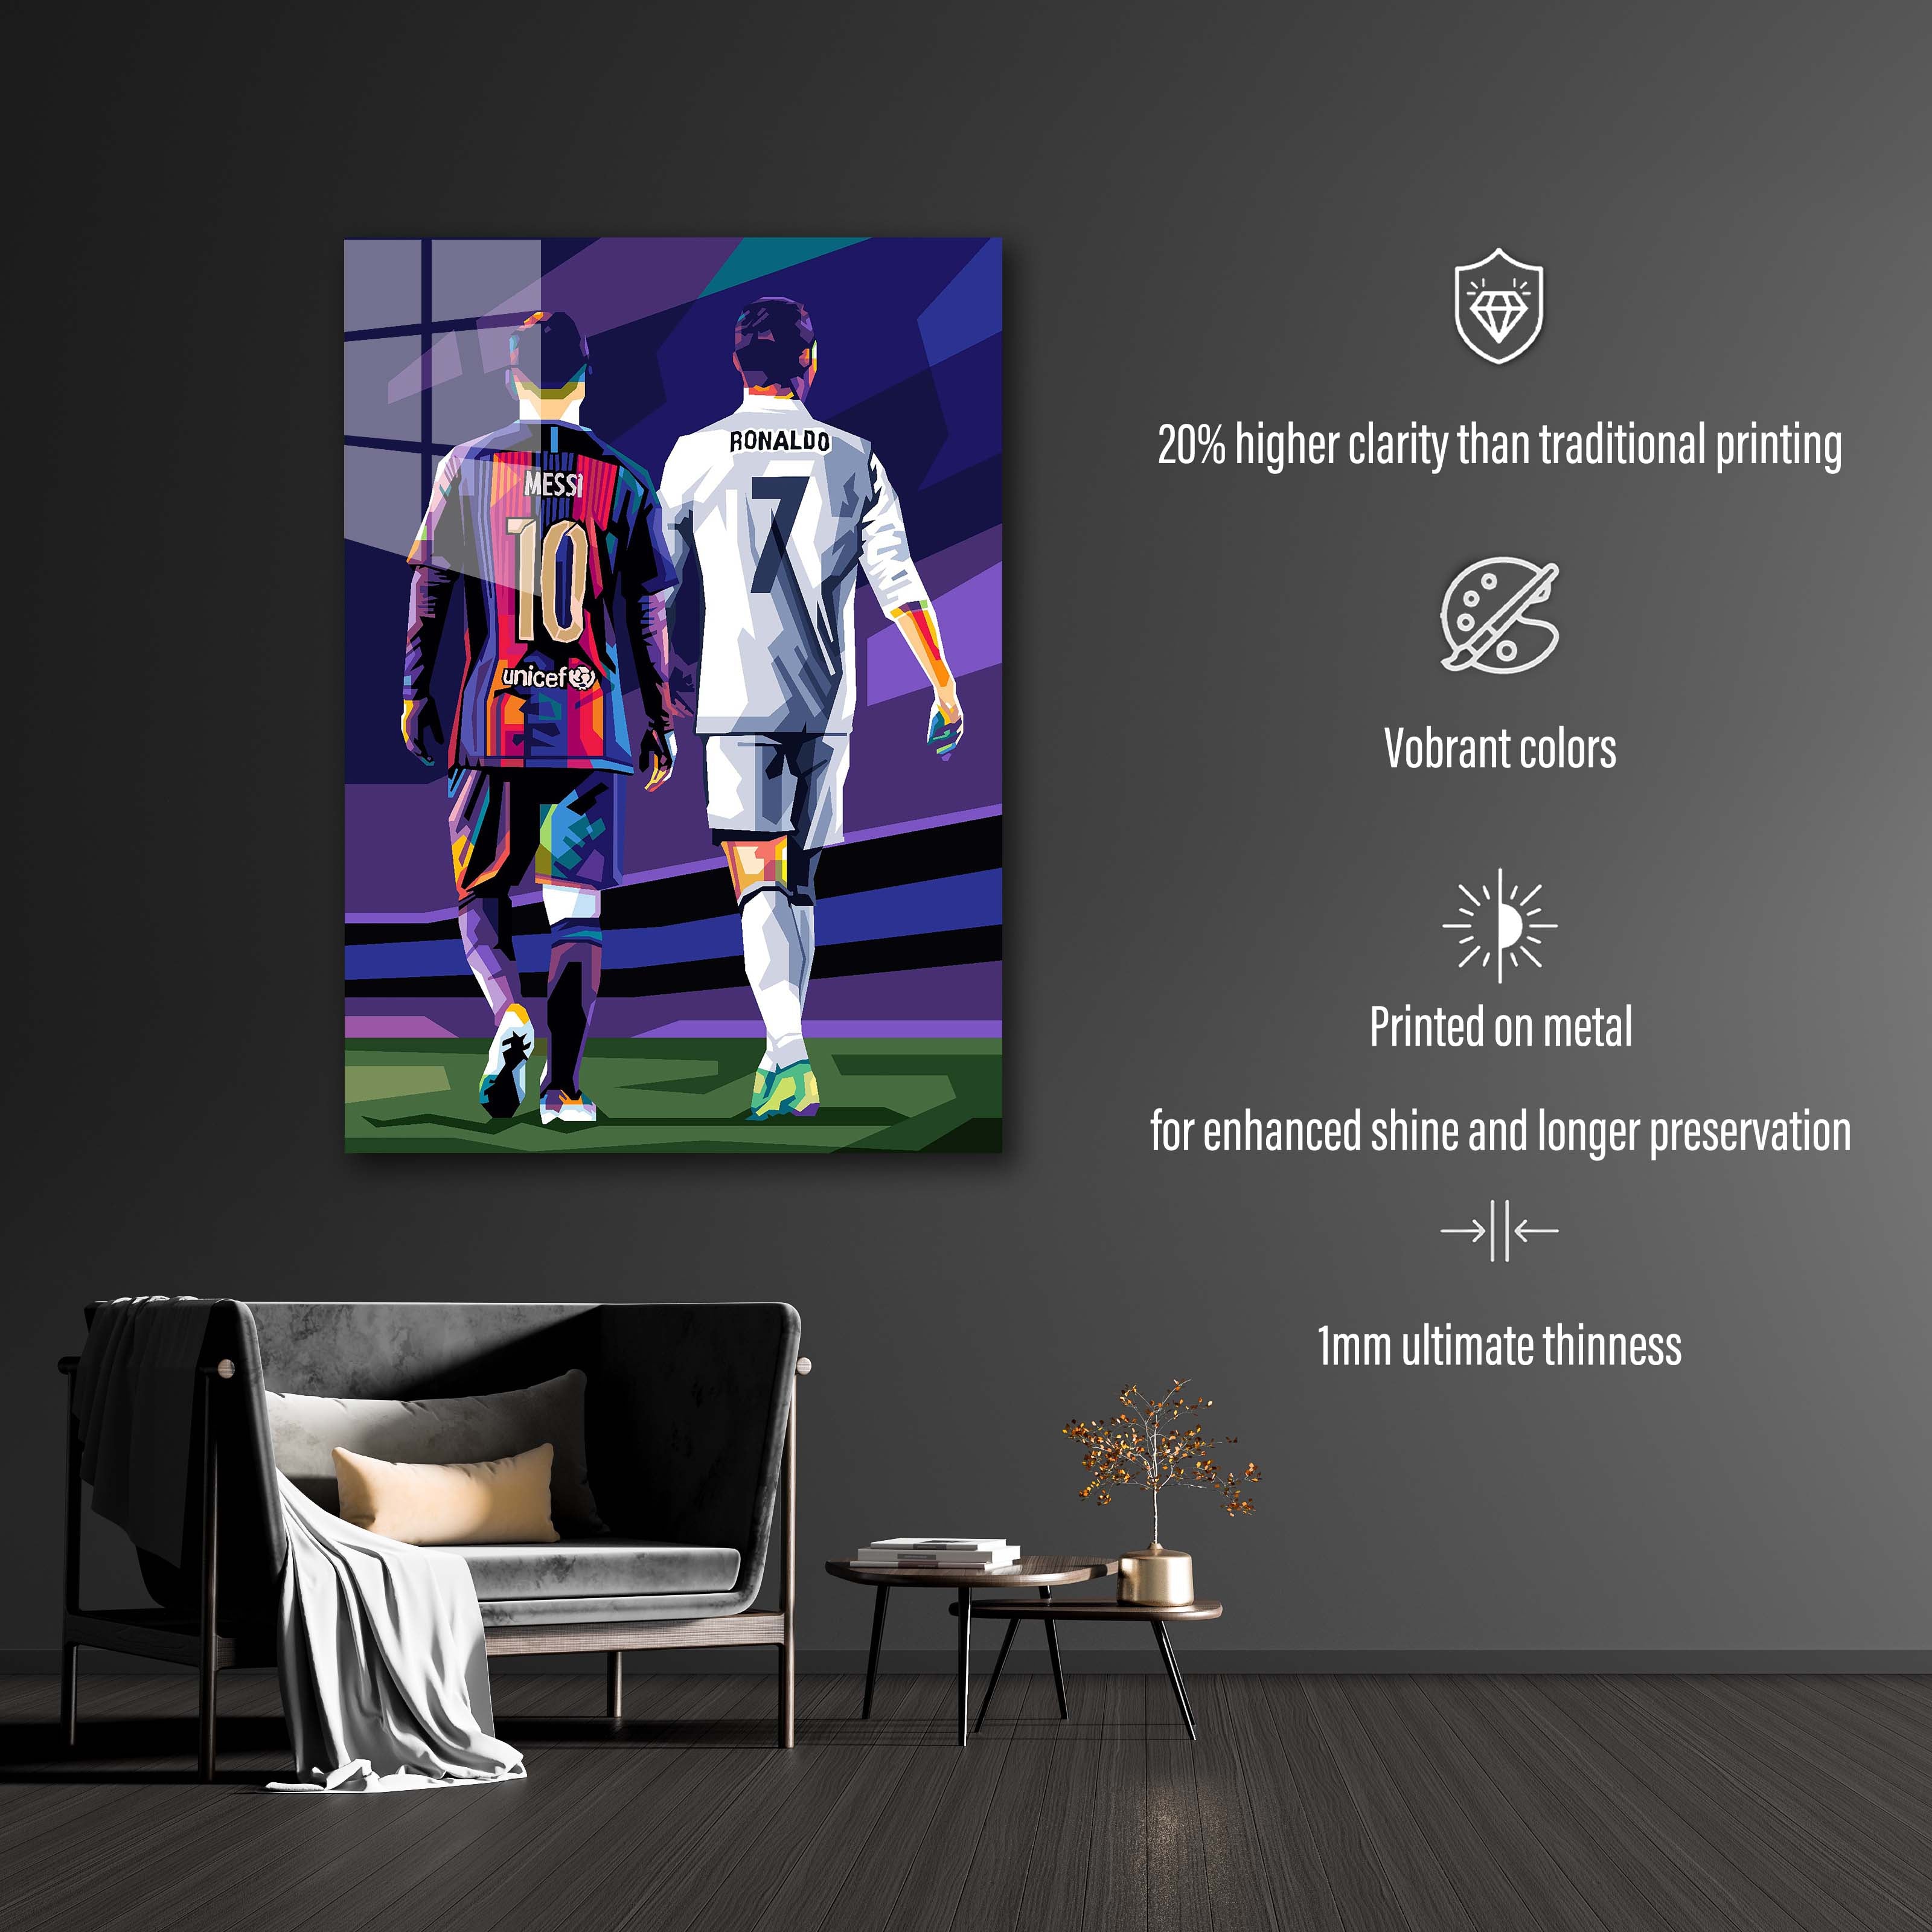 Messi and Ronaldo WPAP-designed by @Agil Topann